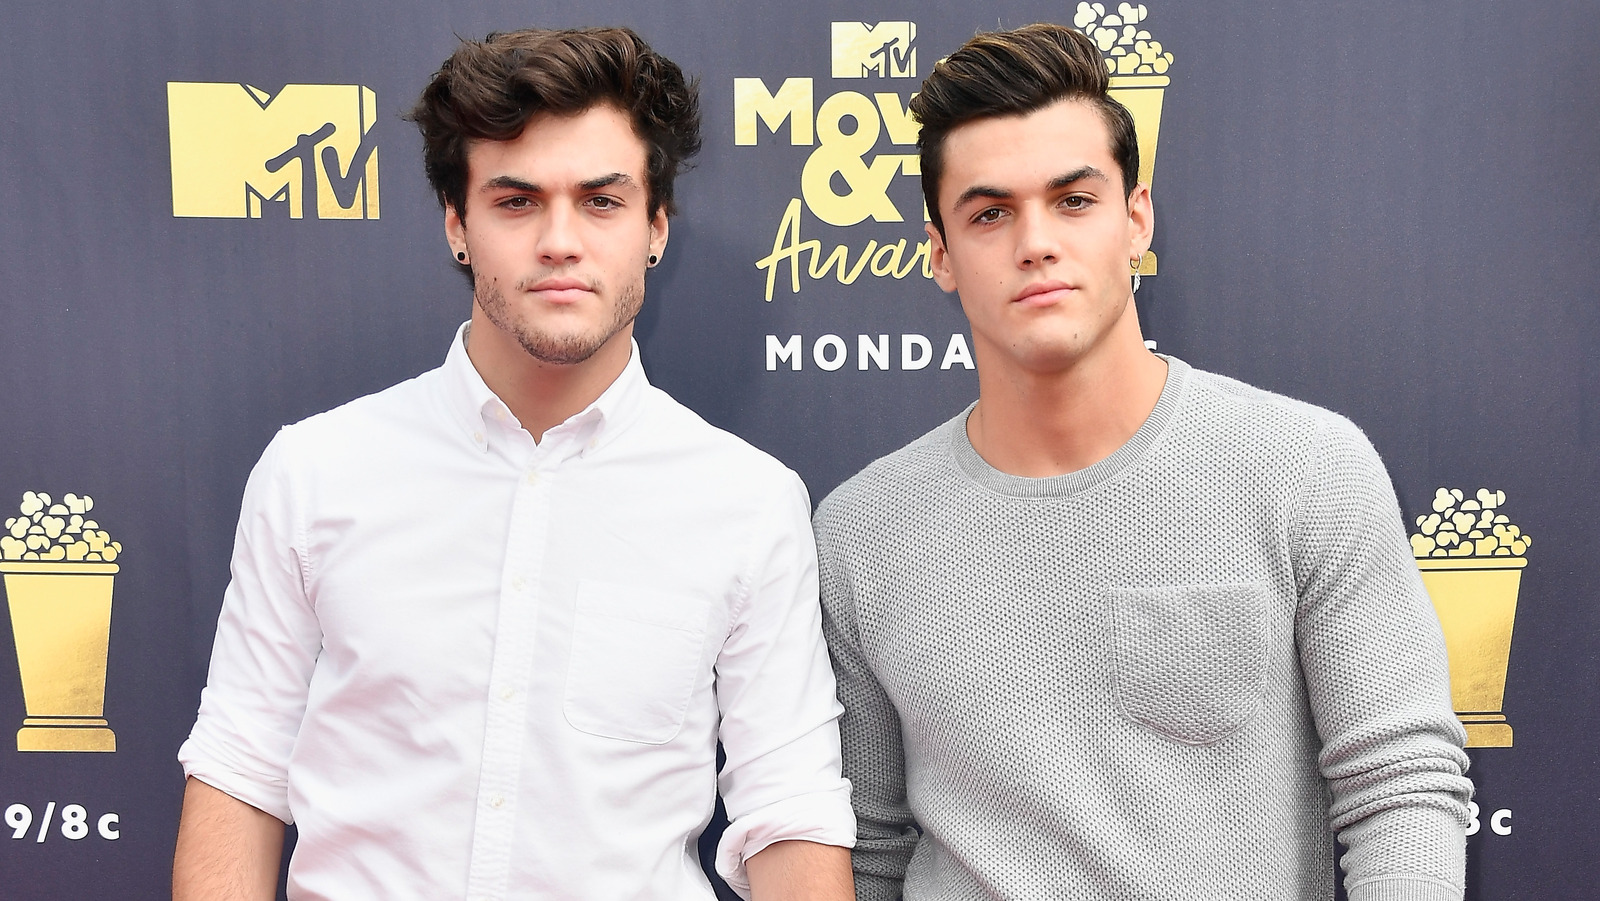 What Happened To The Dolan Twins? - Internewscast